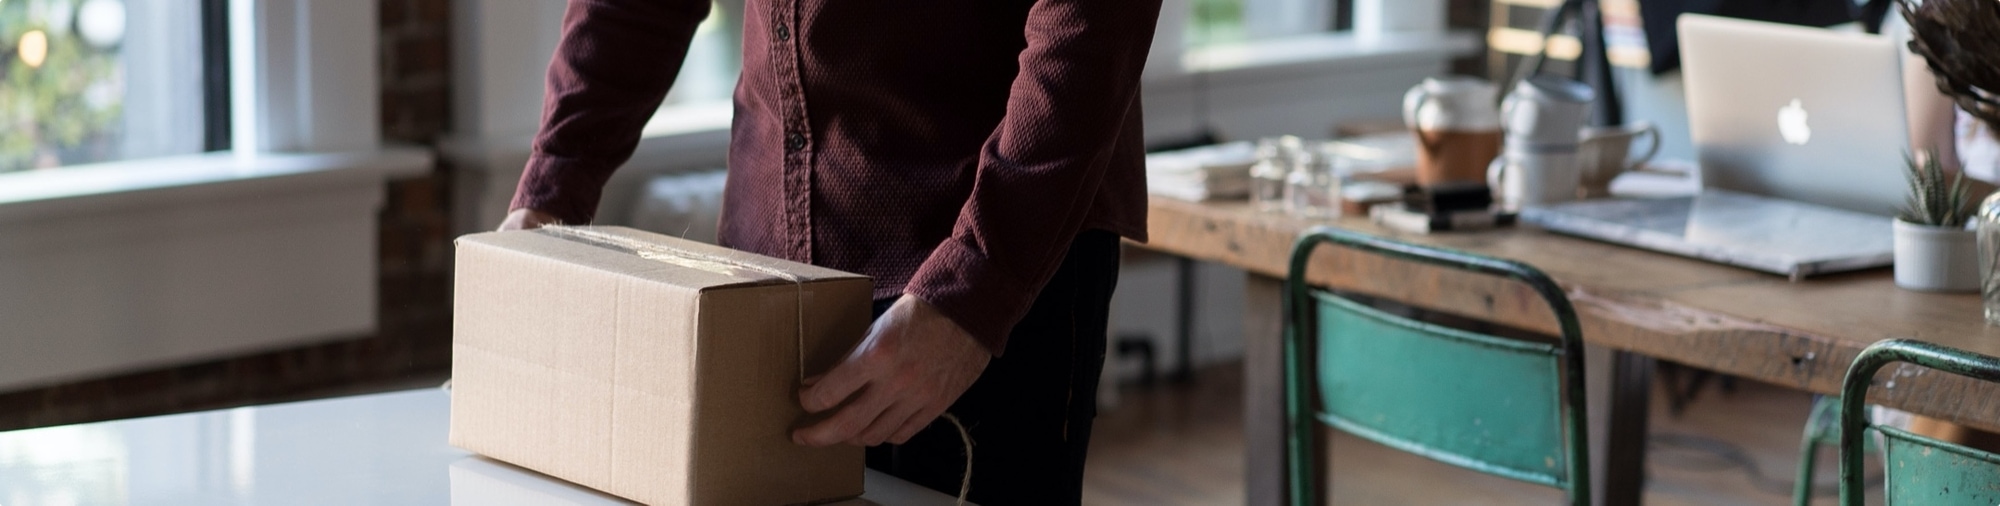 Close up image of a man wrapping a package in his home office